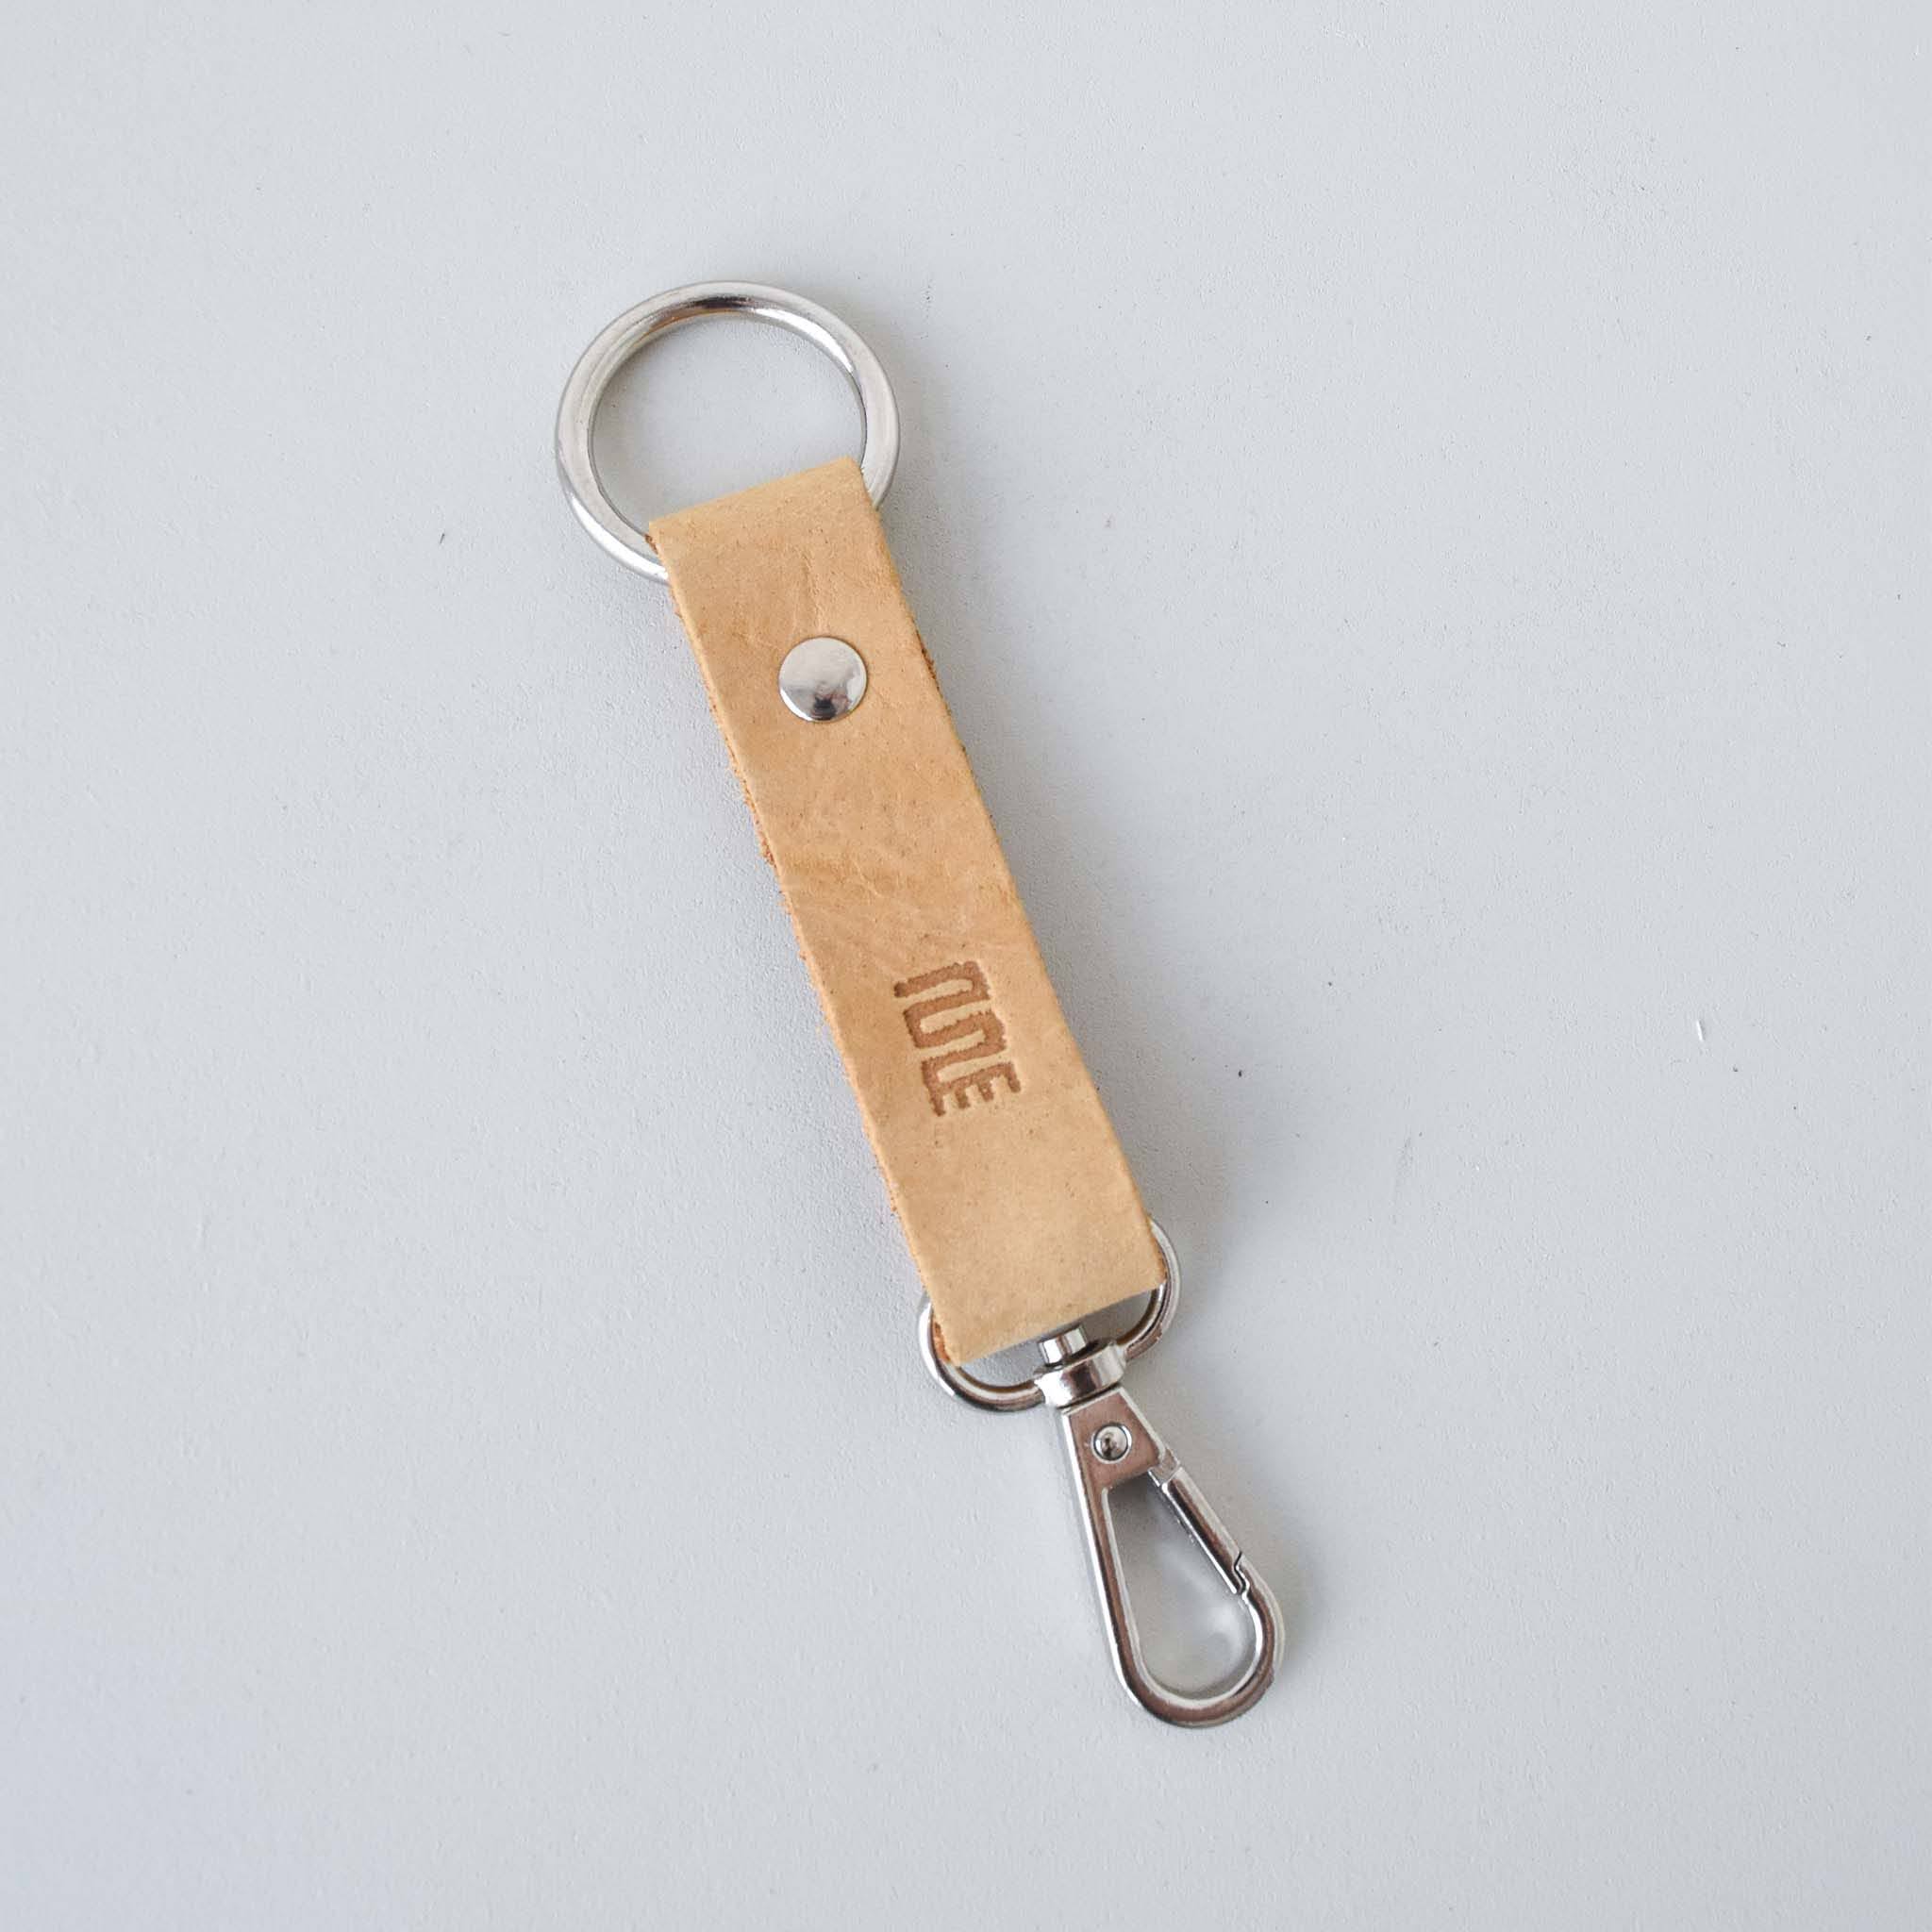 Leather key clip - handmade by the Amani women using Kenyan leather for a Fair Trade boutique